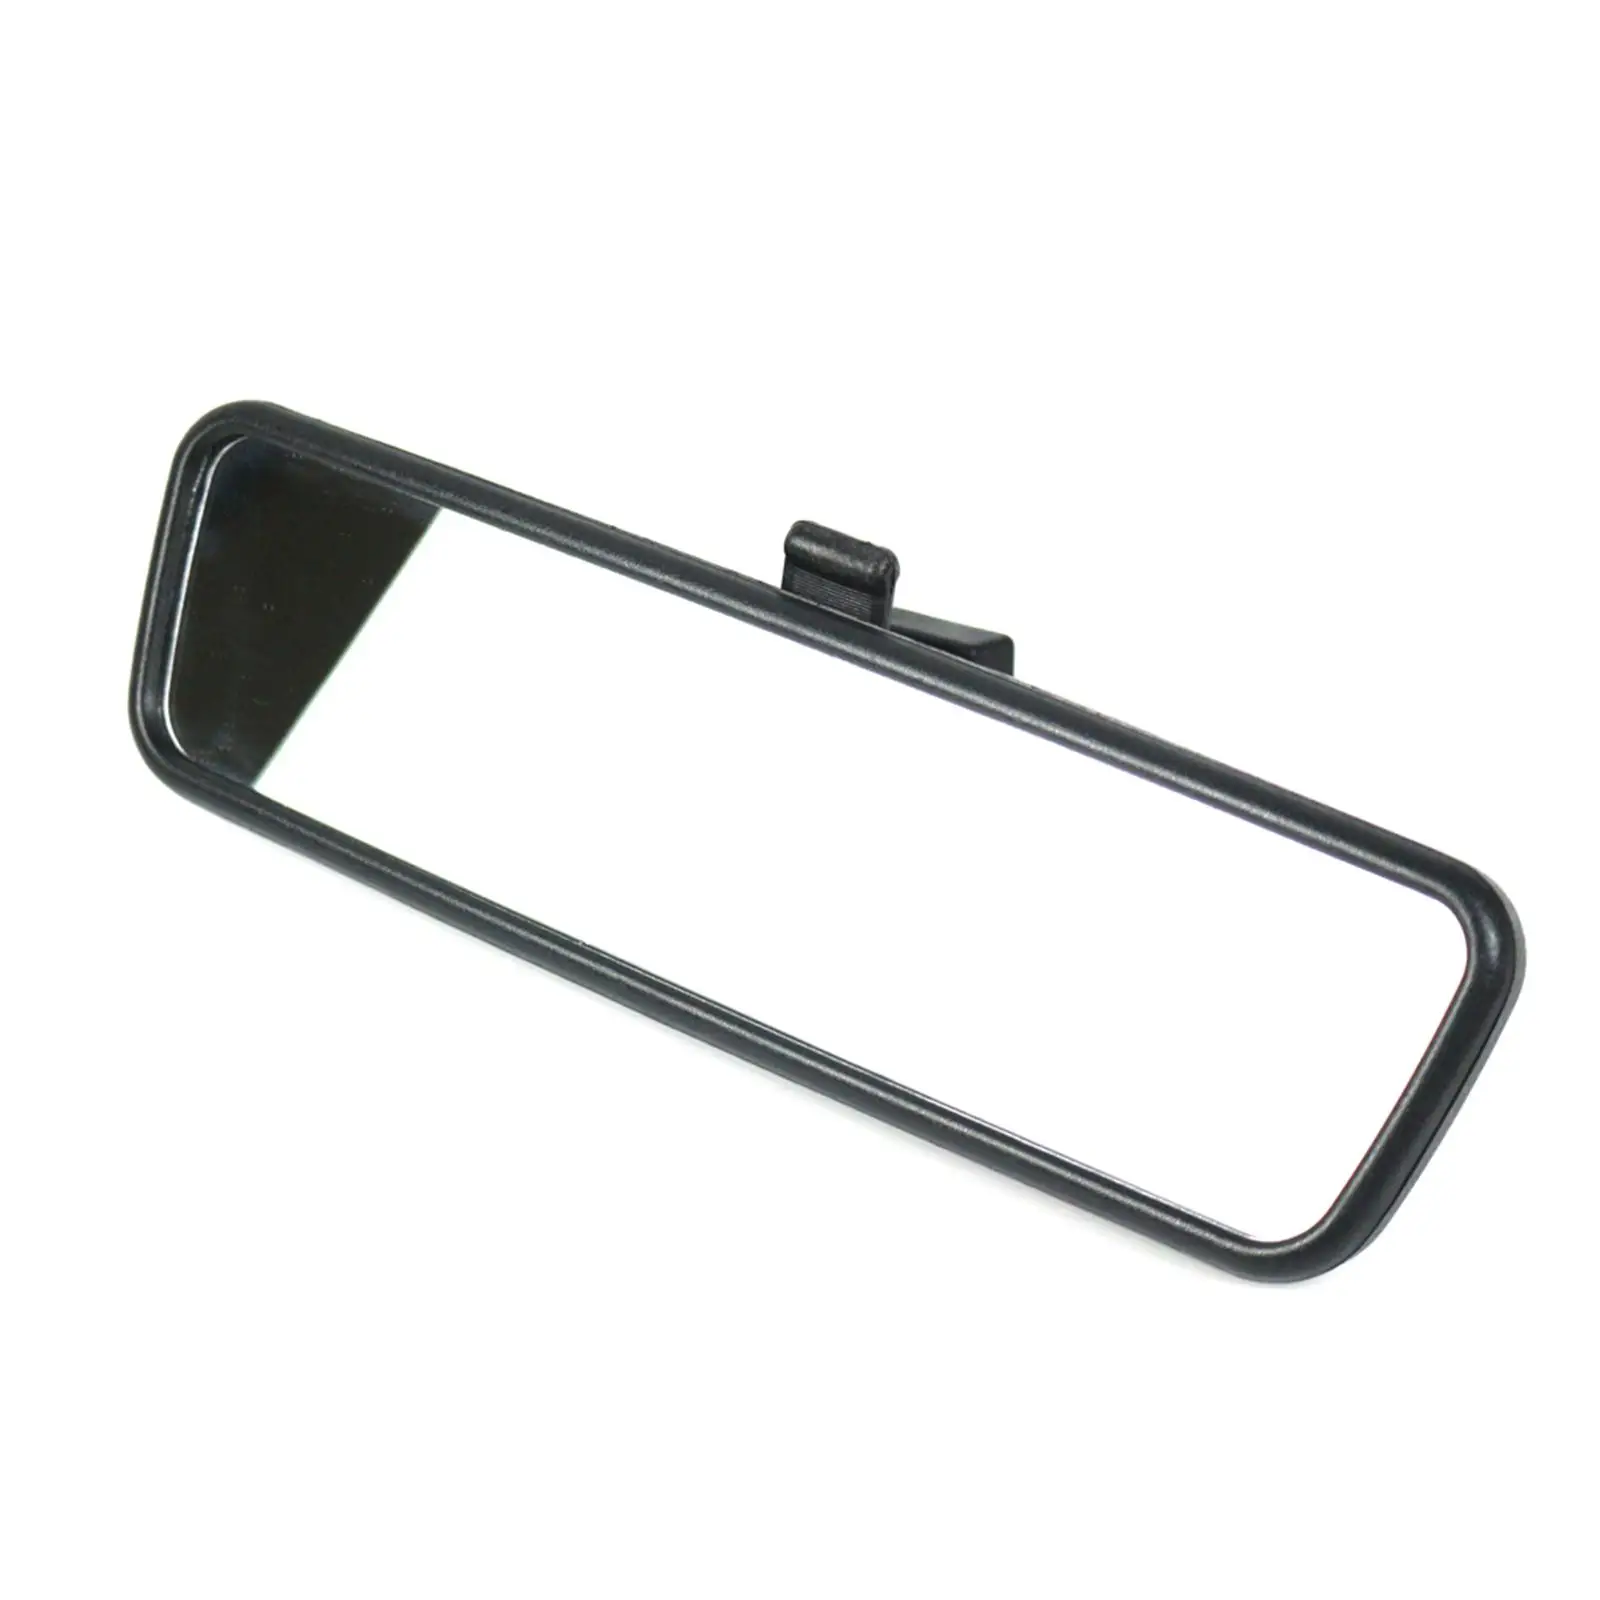 Interior Rear View Mirror, 814842 Rearview Mirror for 107 Automotive Replacement High Performance Accessory